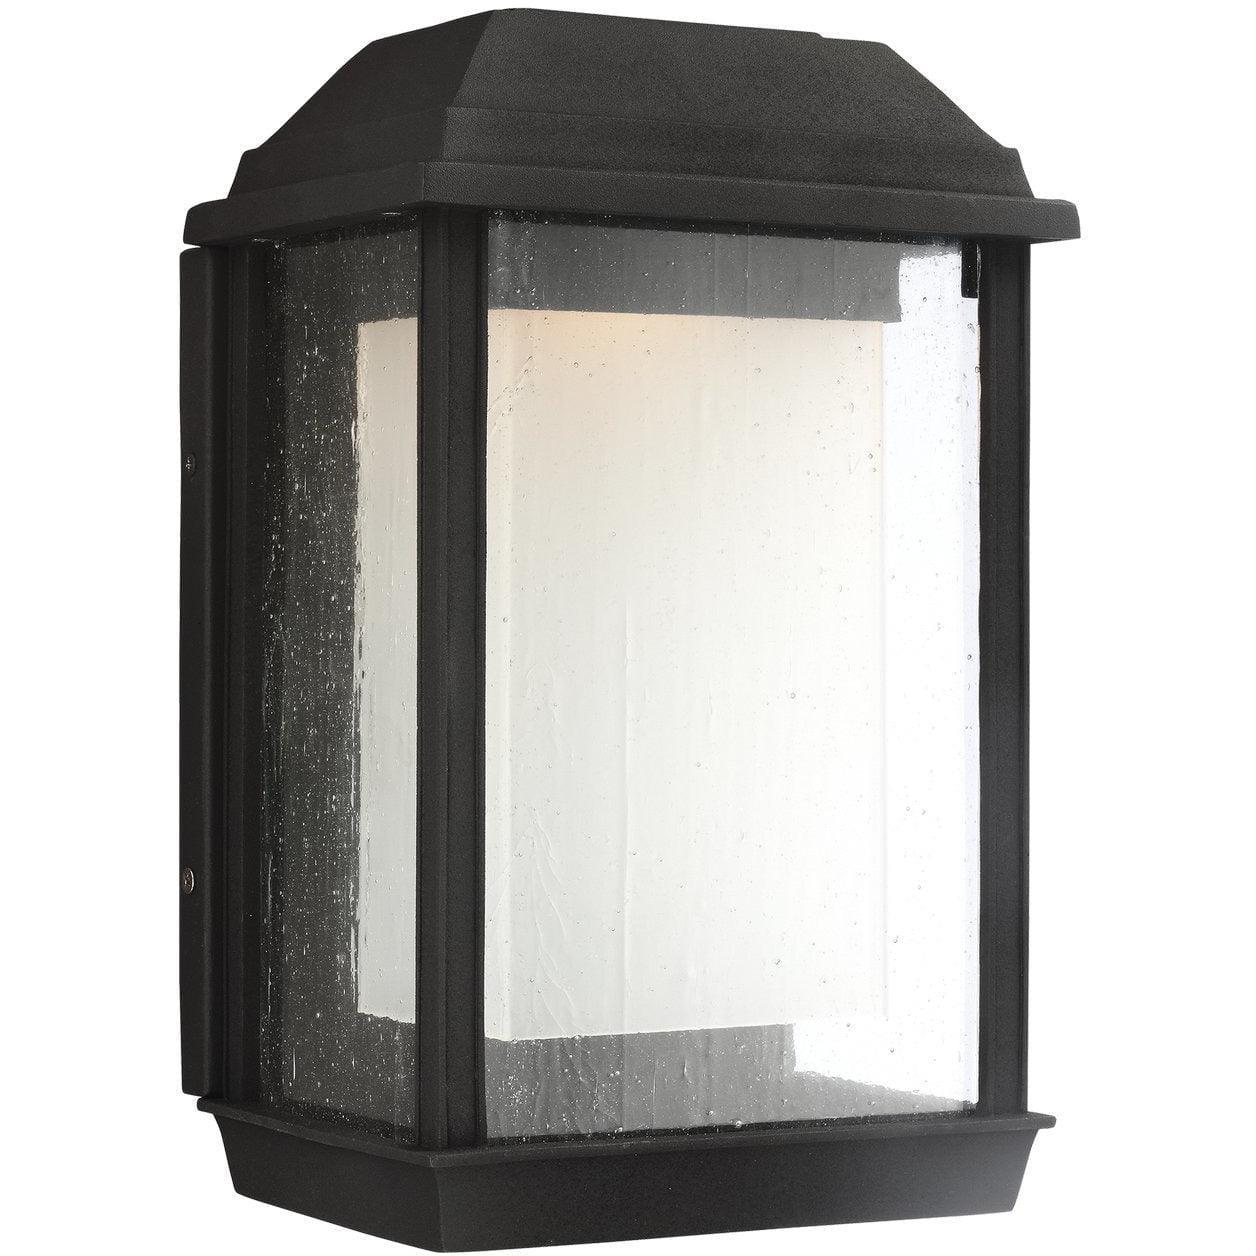 Generation Lighting - McHenry LED Outdoor Wall Sconce - OL12801TXB-L1 | Montreal Lighting & Hardware